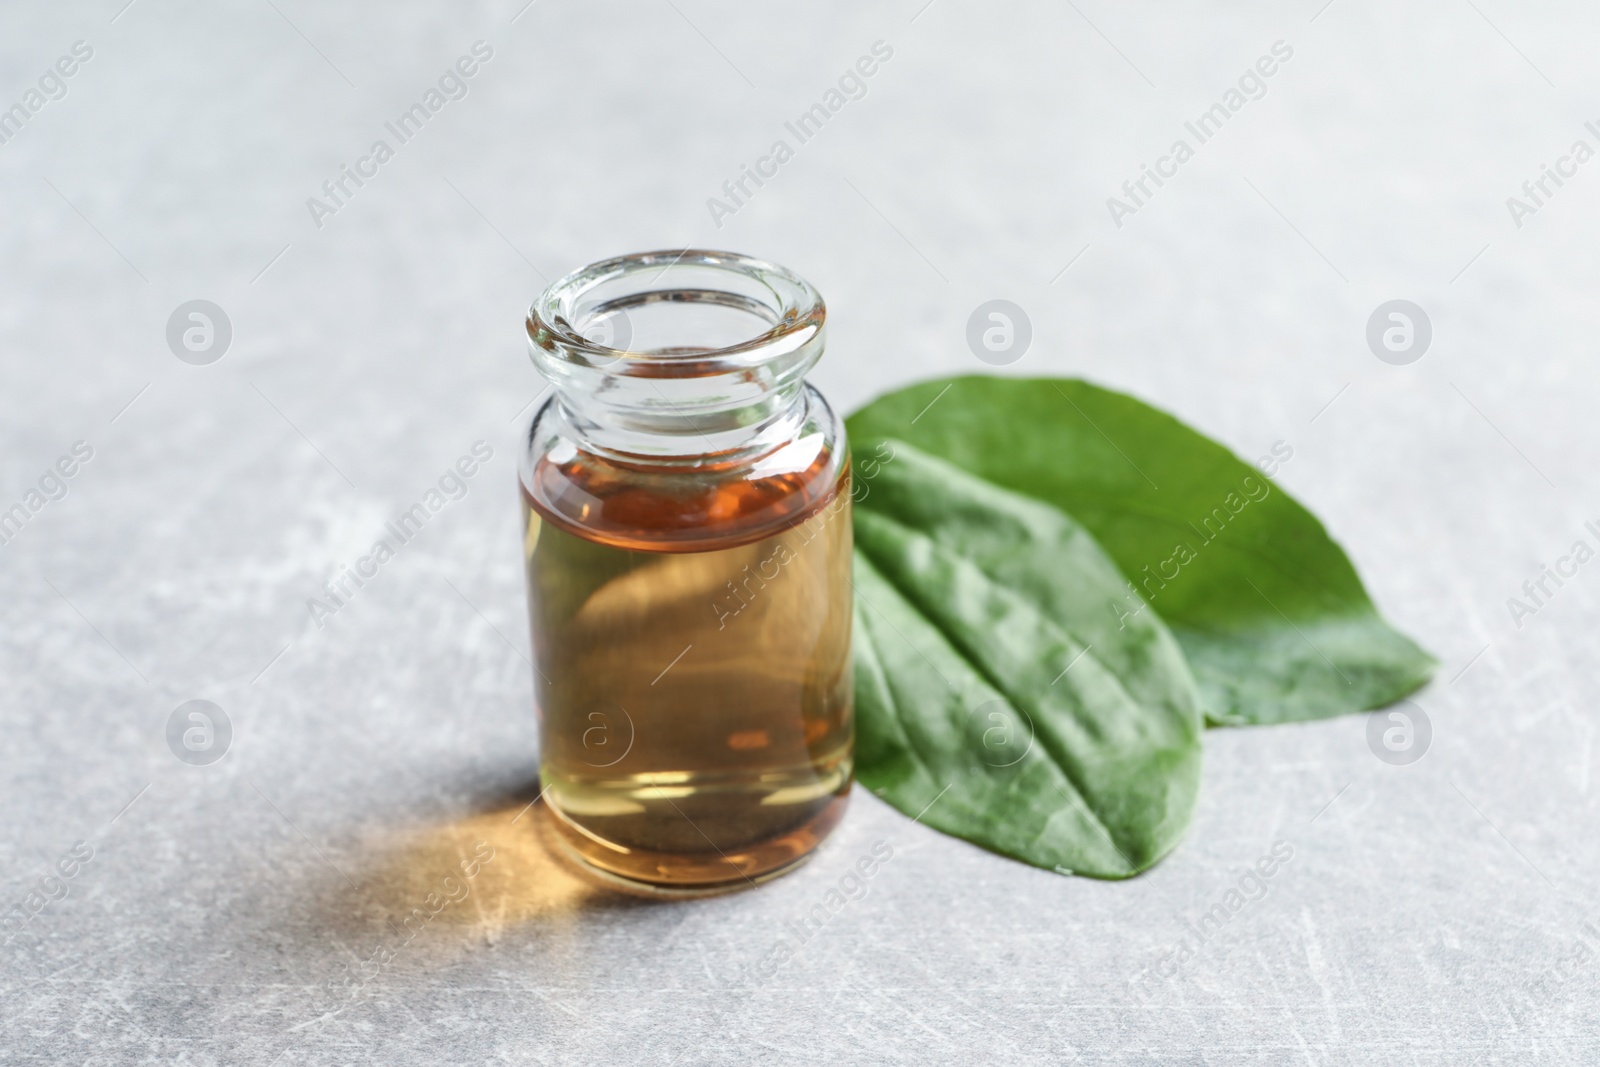 Photo of Bottle of broadleaf plantain extract and leaves on light  table